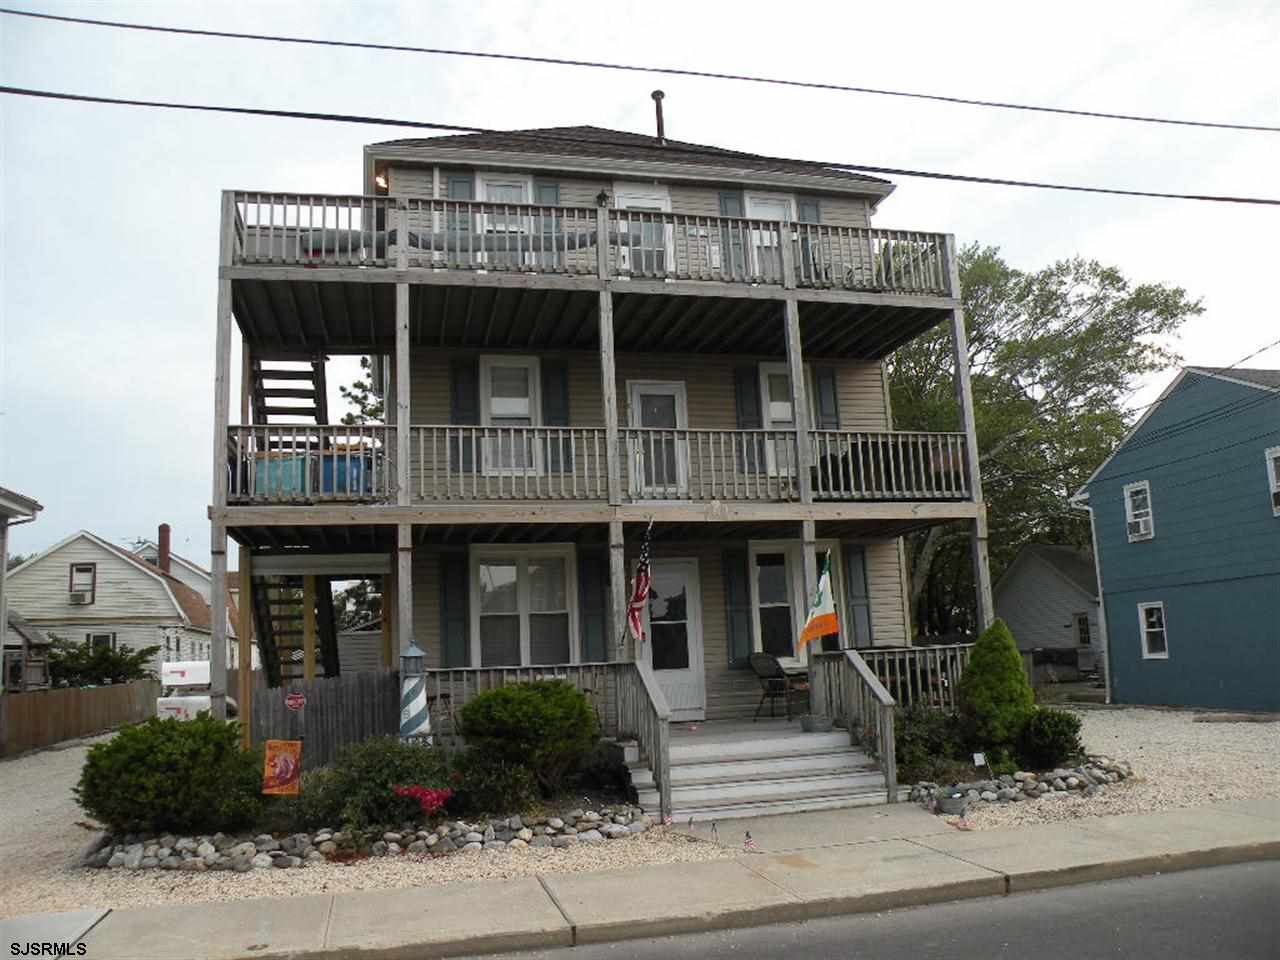  28 W New Jersey Ave Apt E, Beach Haven, New Jersey  photo